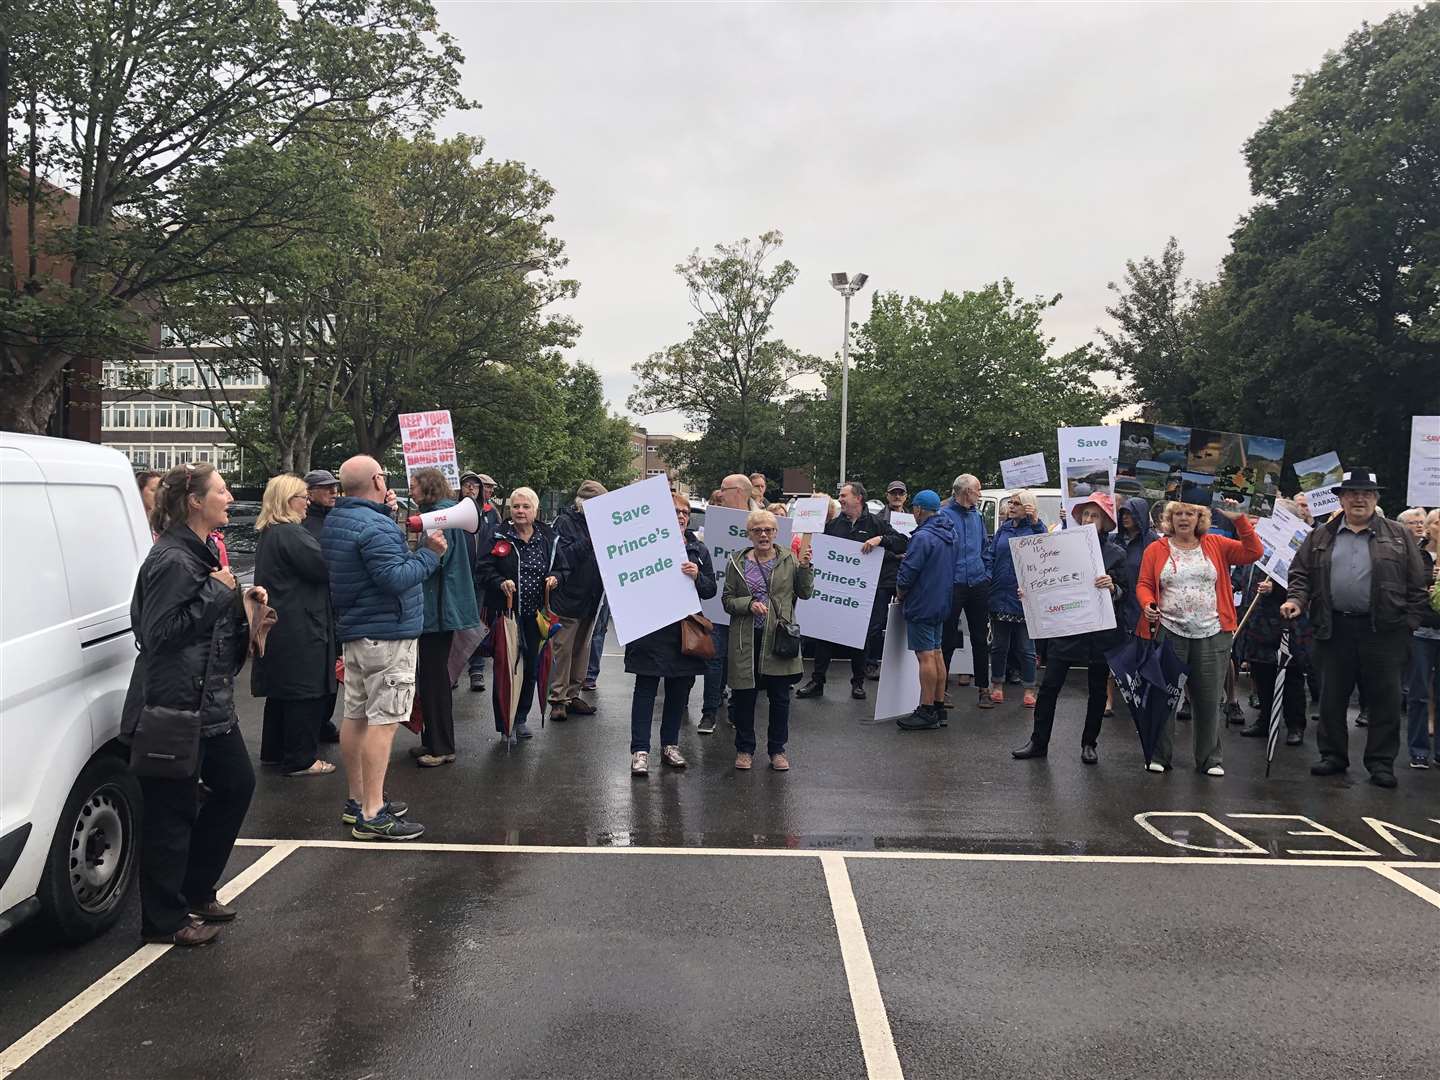 Protesters against the Princes Parade scheme gathered outside Folkestone and Hythe District Council (11298642)